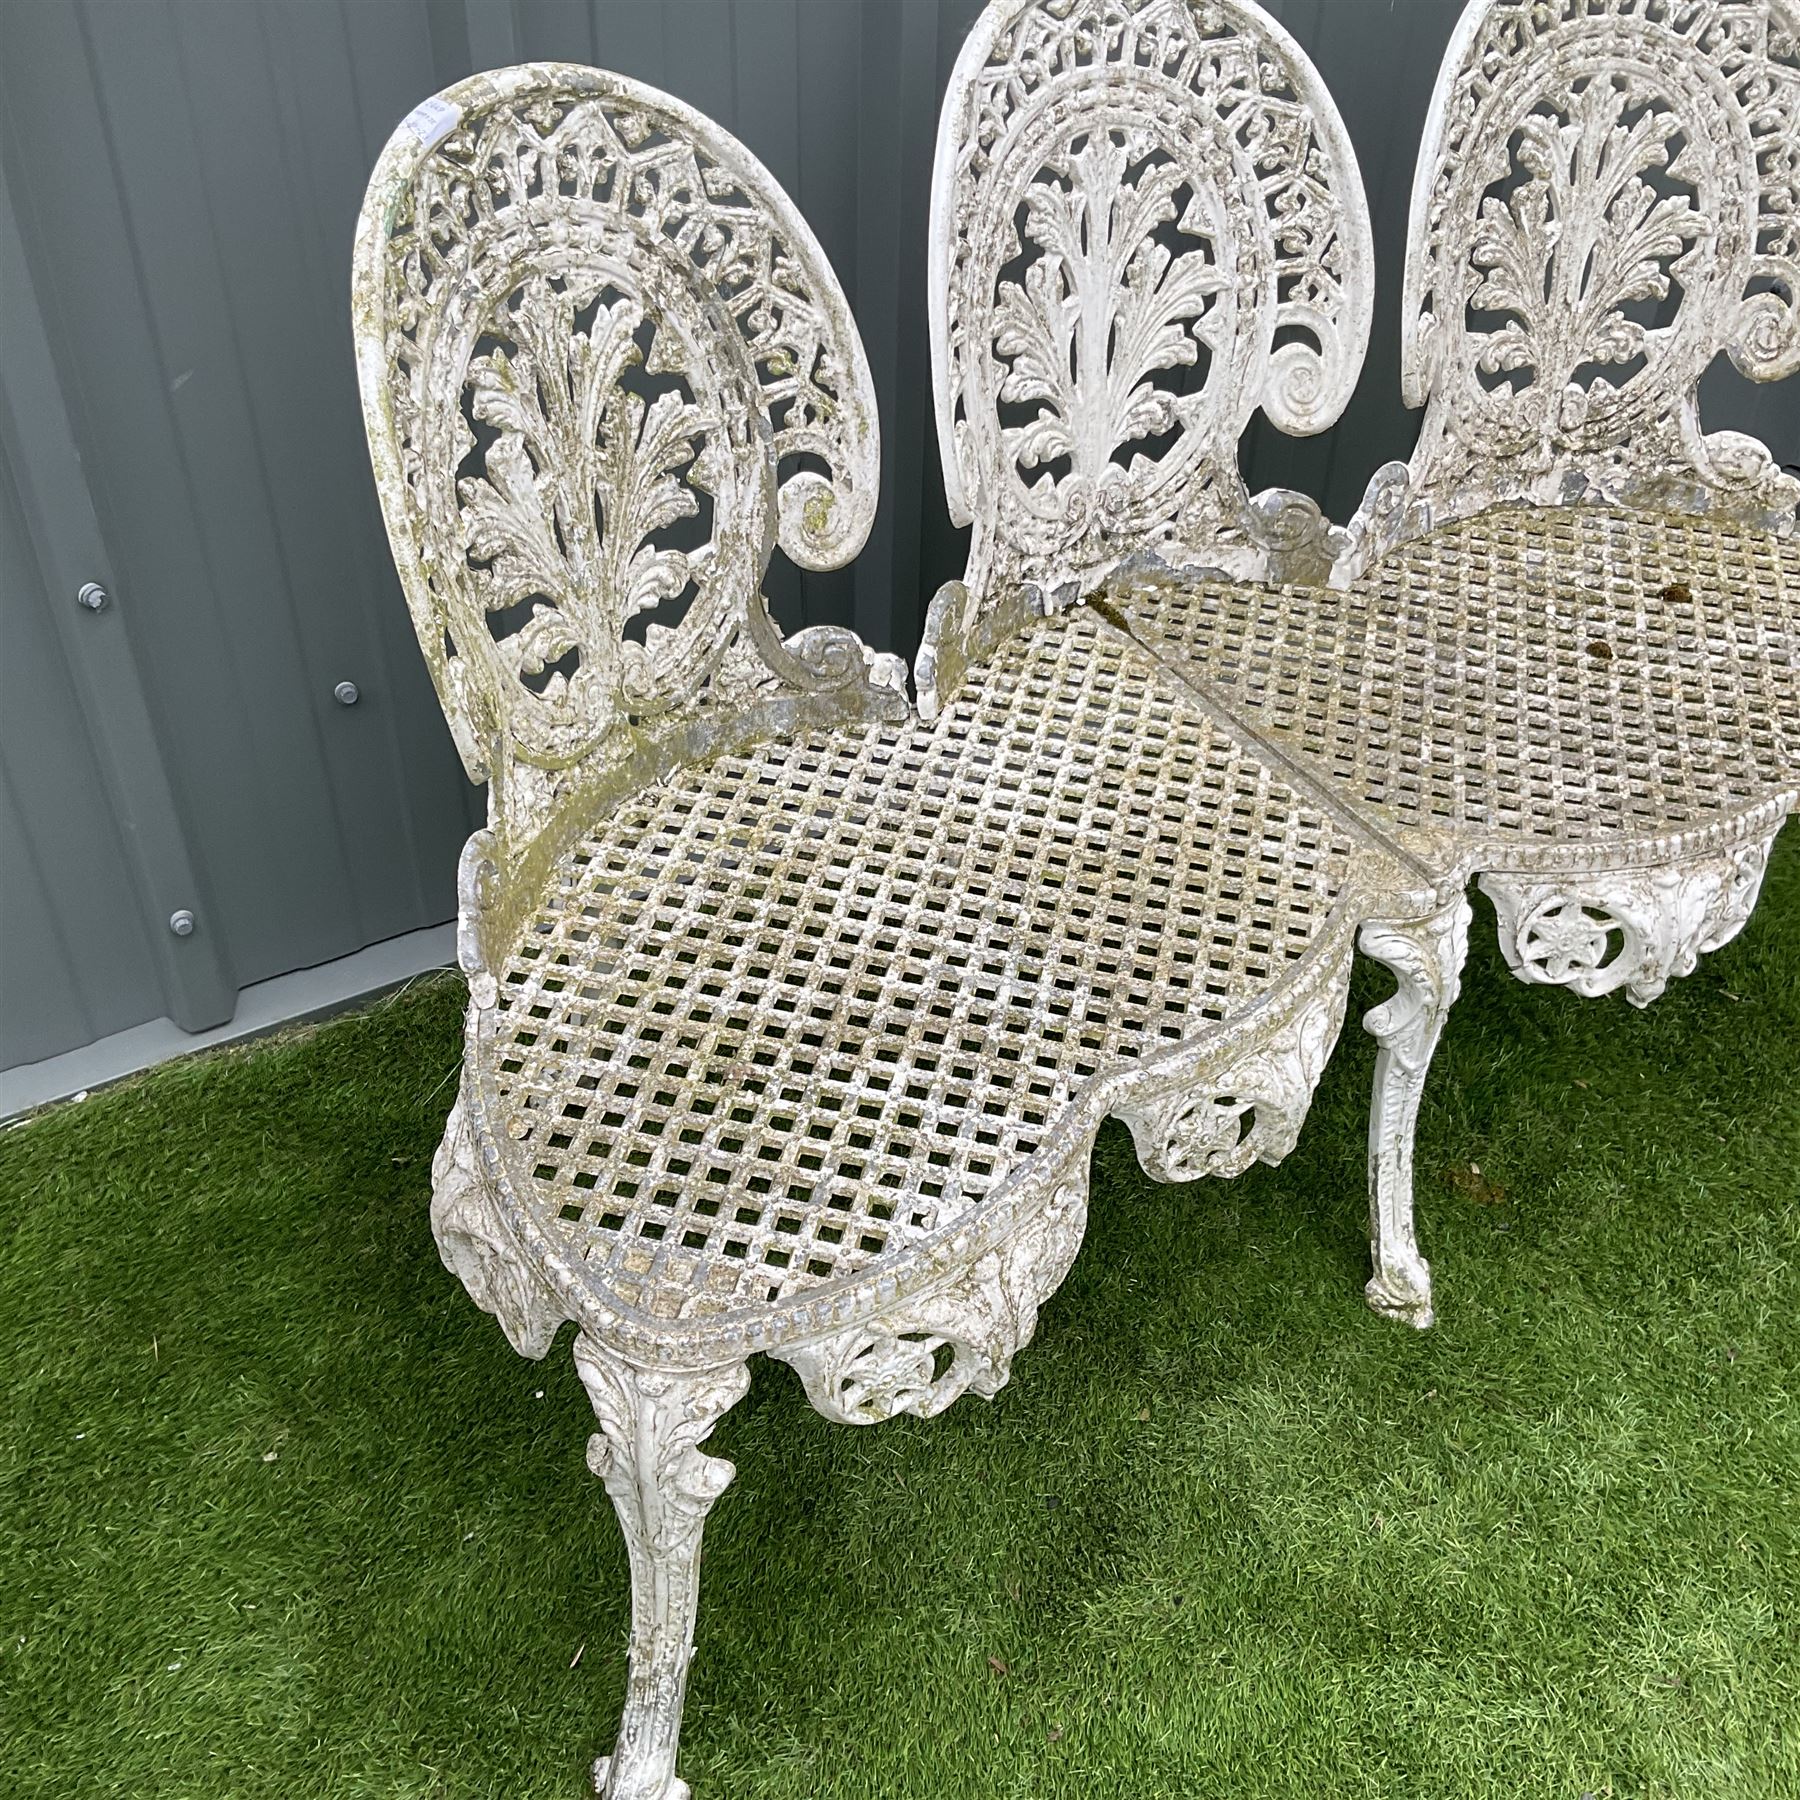 Cast aluminium thee seat garden bench painted in white - Image 2 of 5